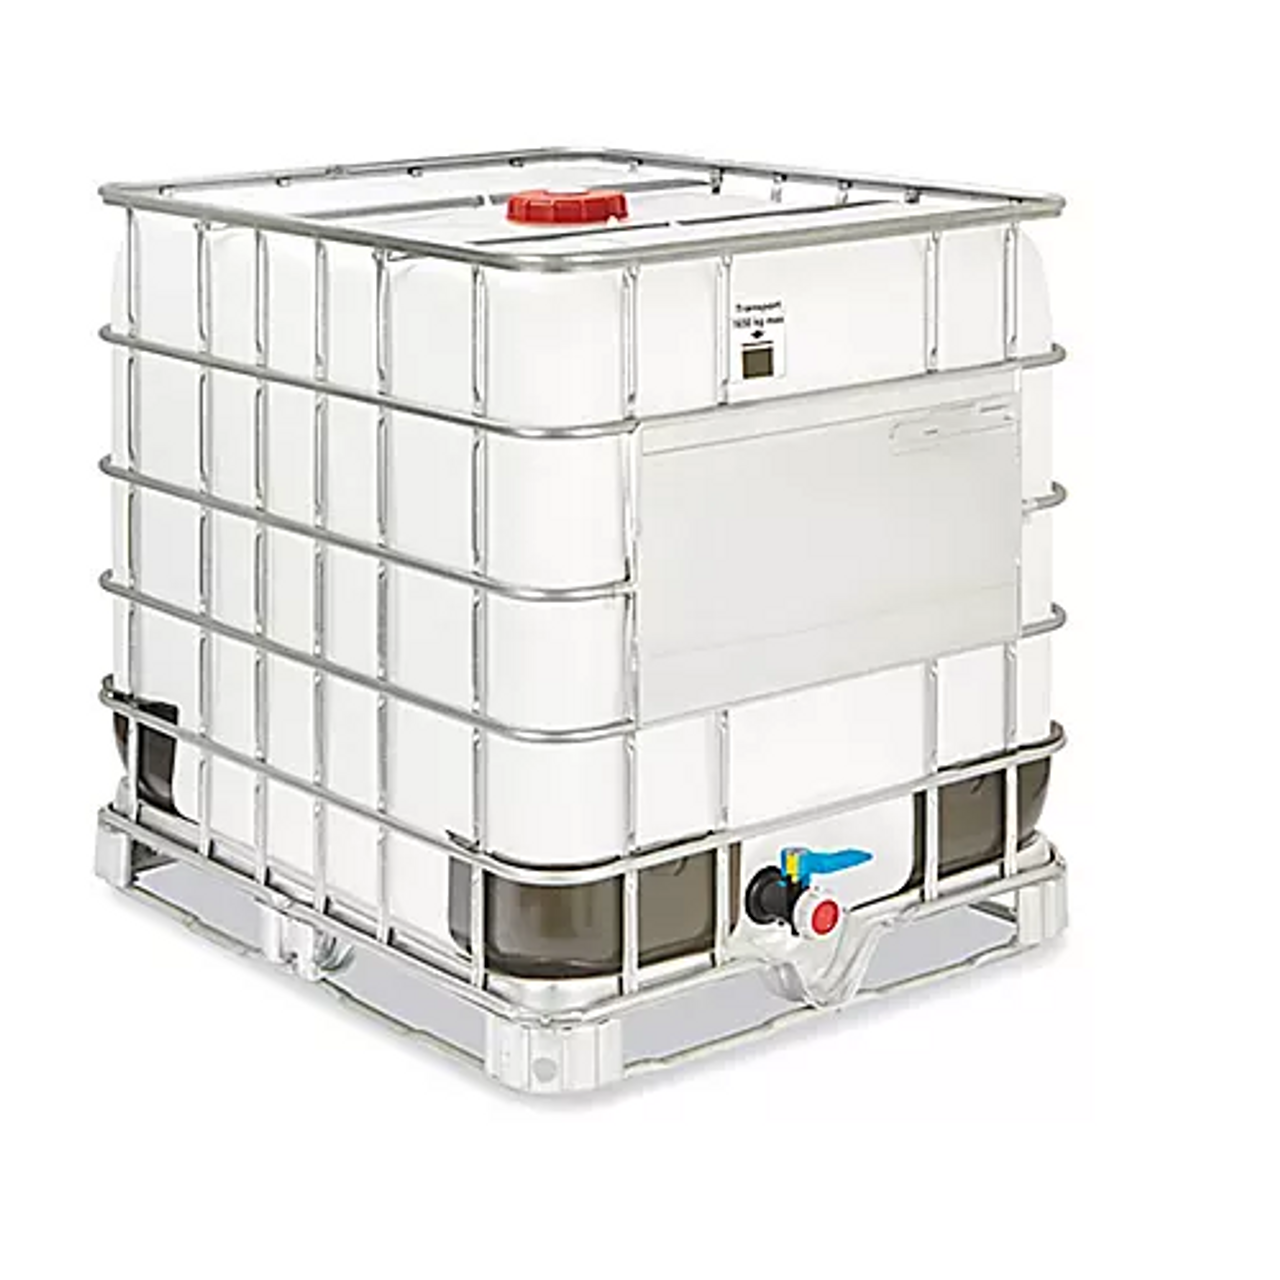 Neat Distributing 275 gal. FDA-Approved IBC Liquid Storage Tote at Tractor  Supply Co.